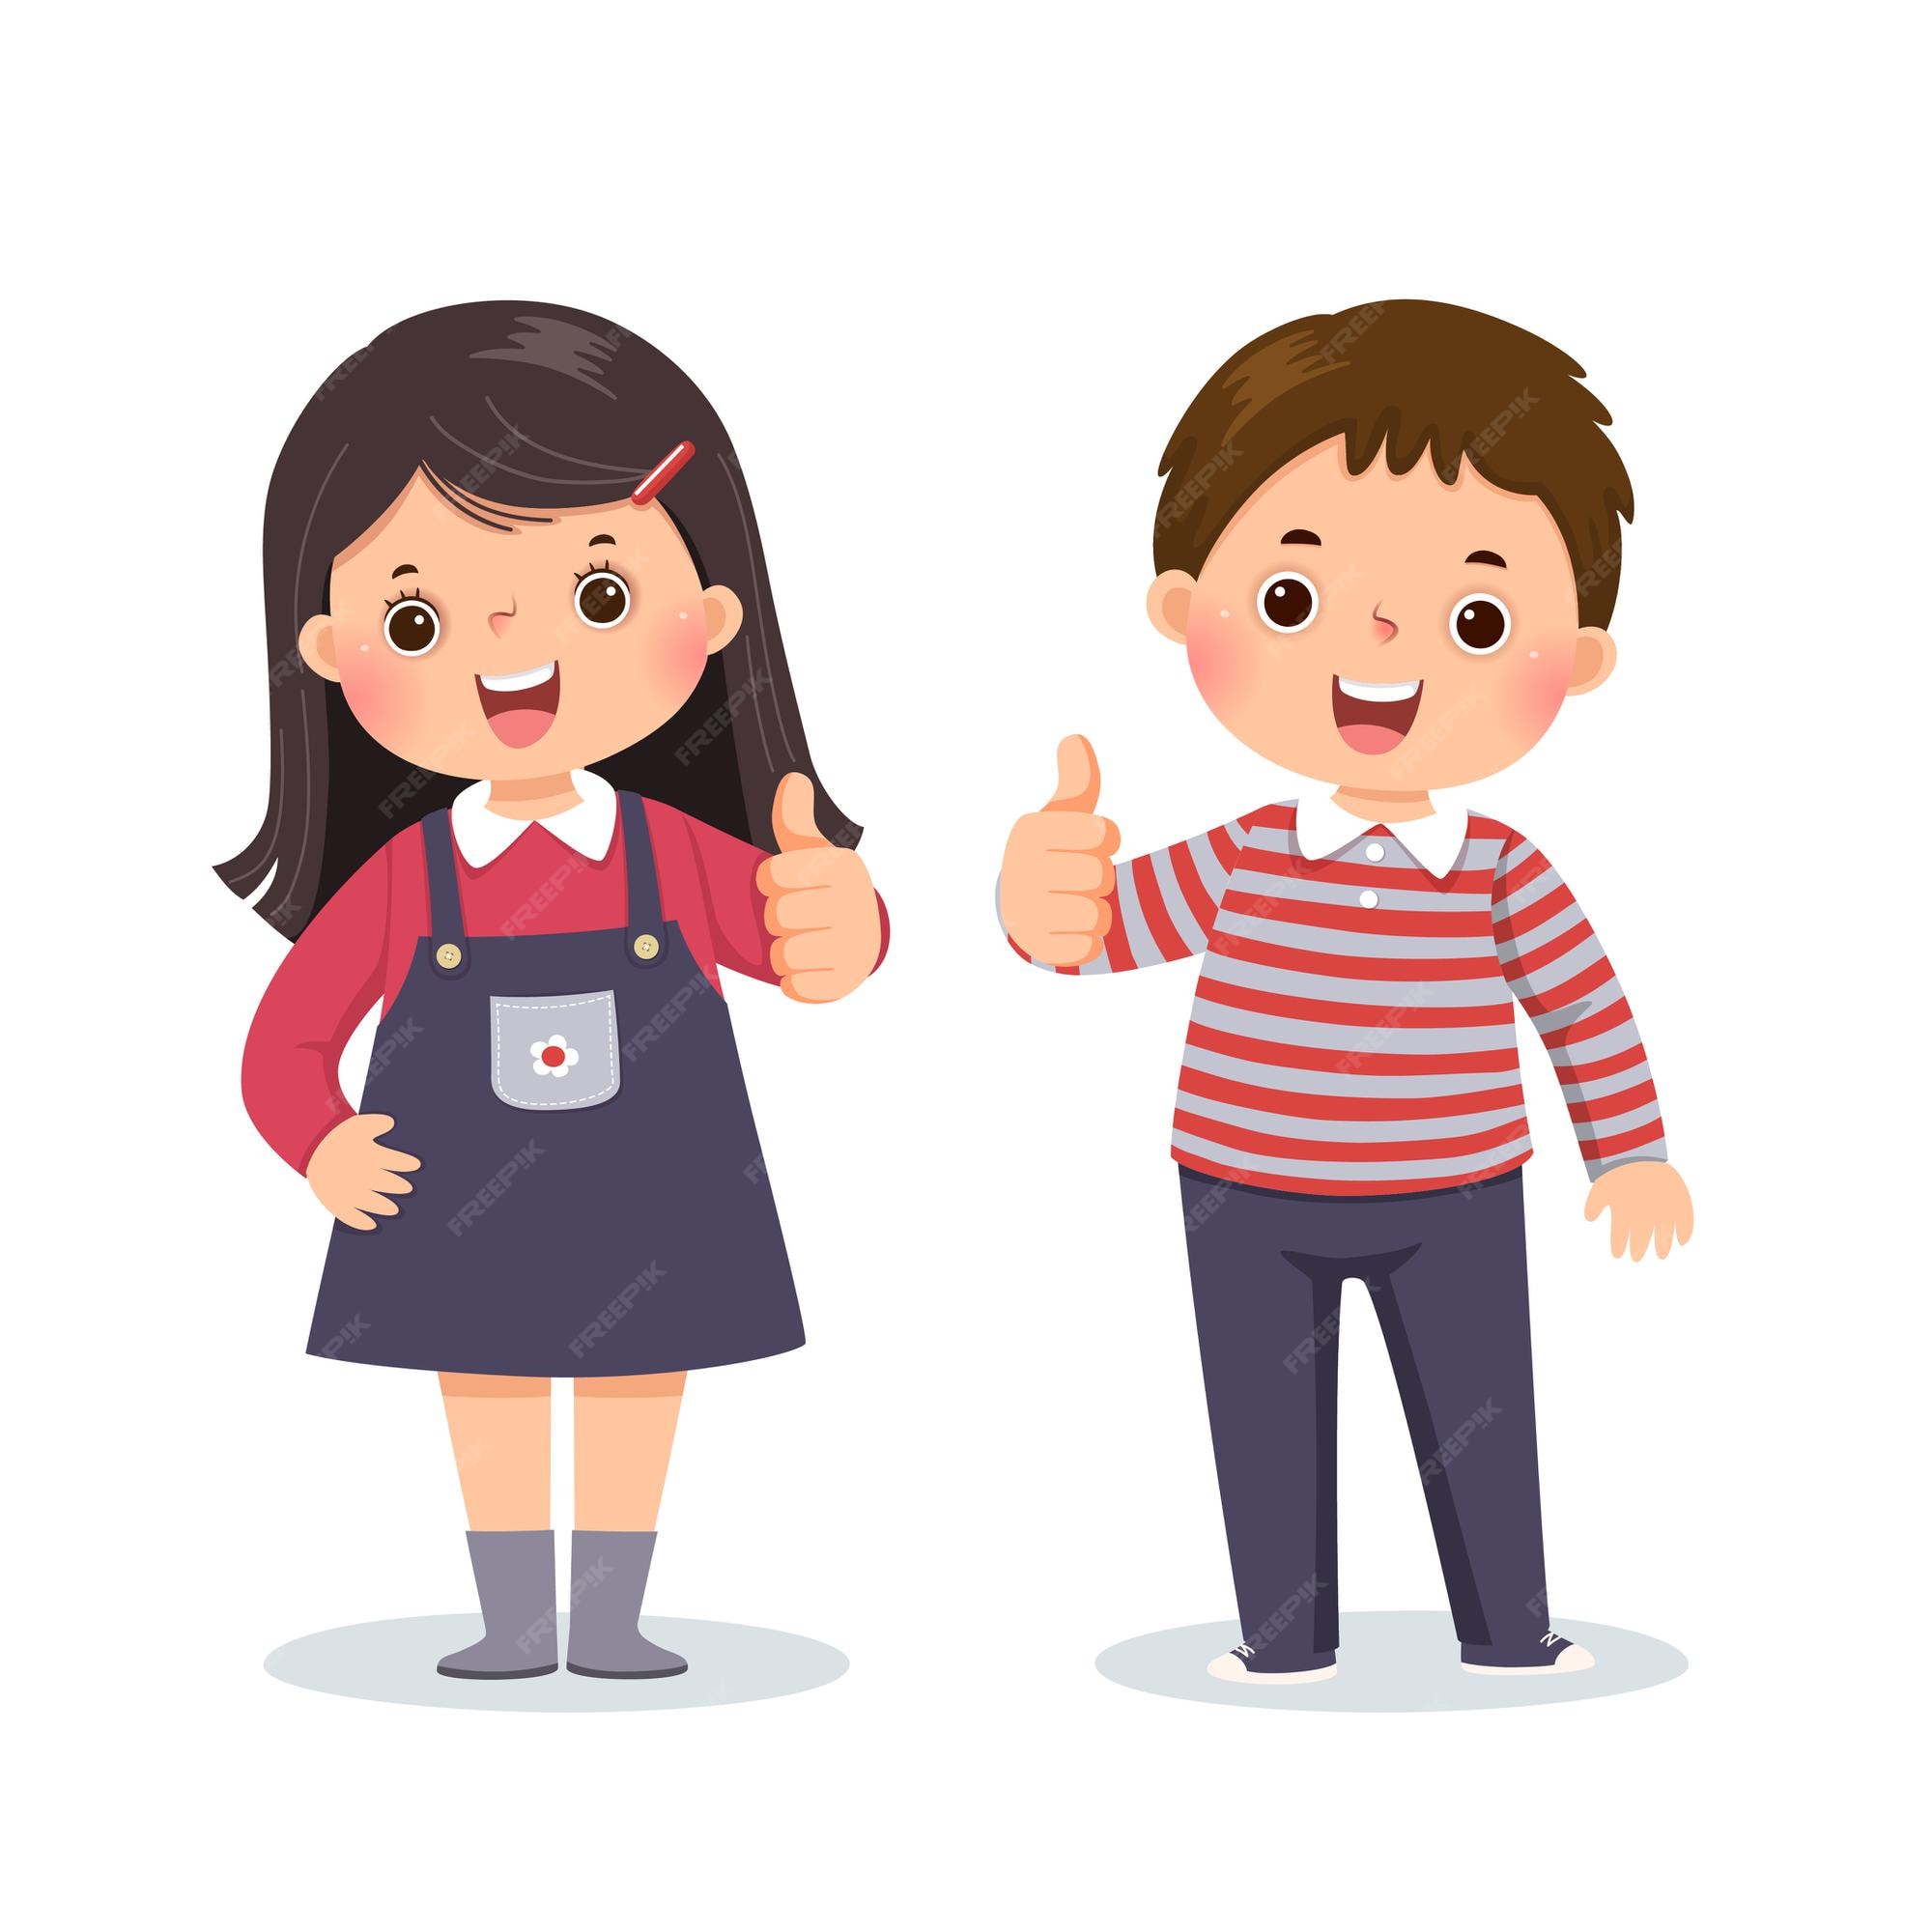 Premium Vector | Cartoon of a little boy and girl showing thumbs up with  cheerful expression.